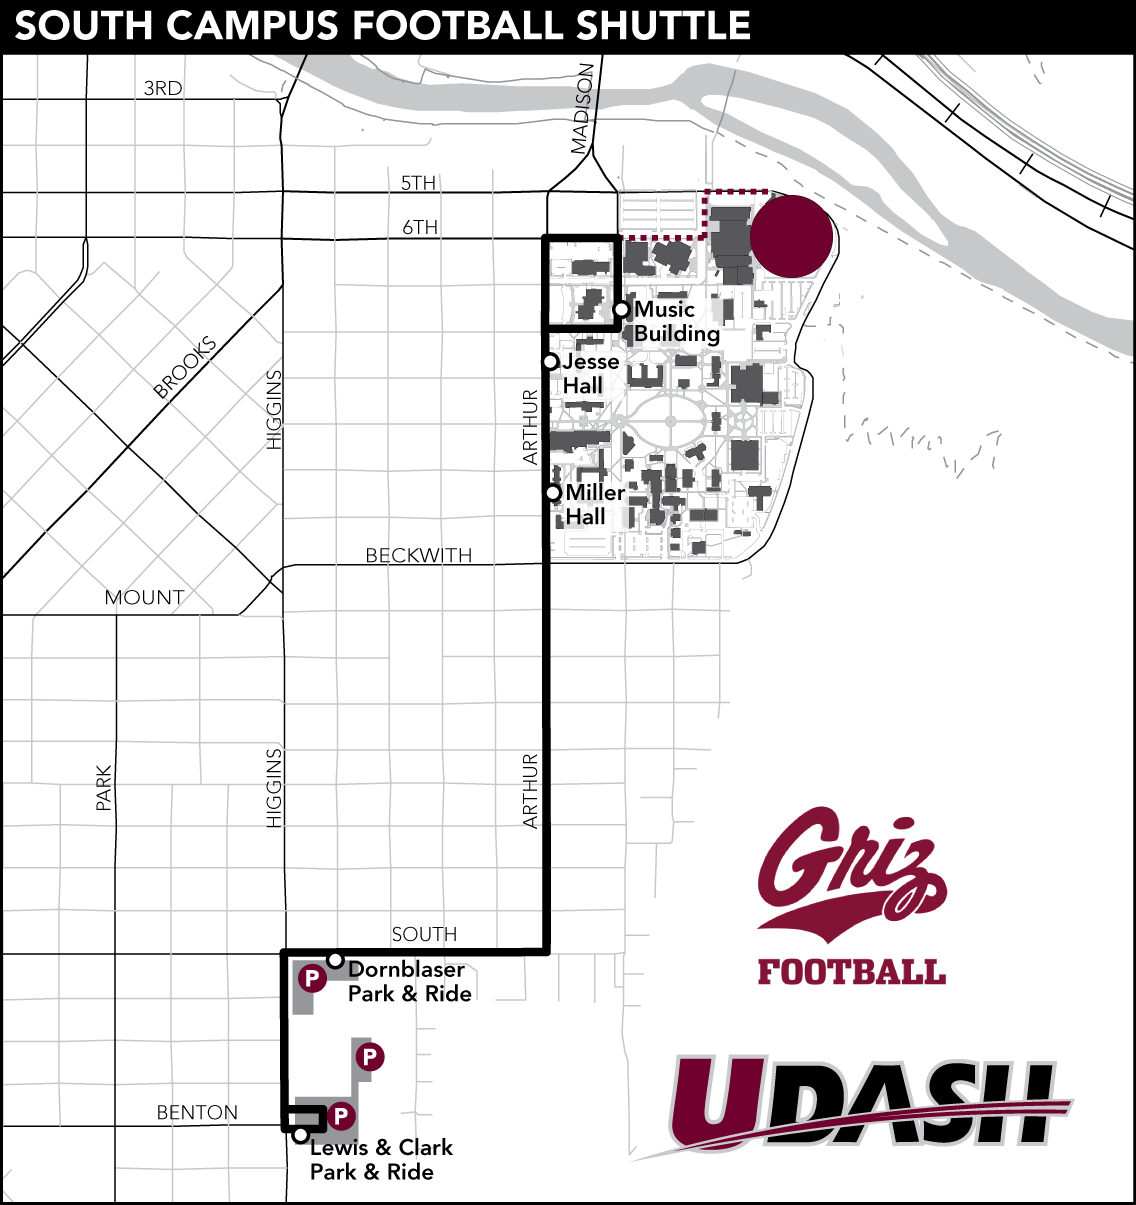 South Campus Football Shuttle Map.